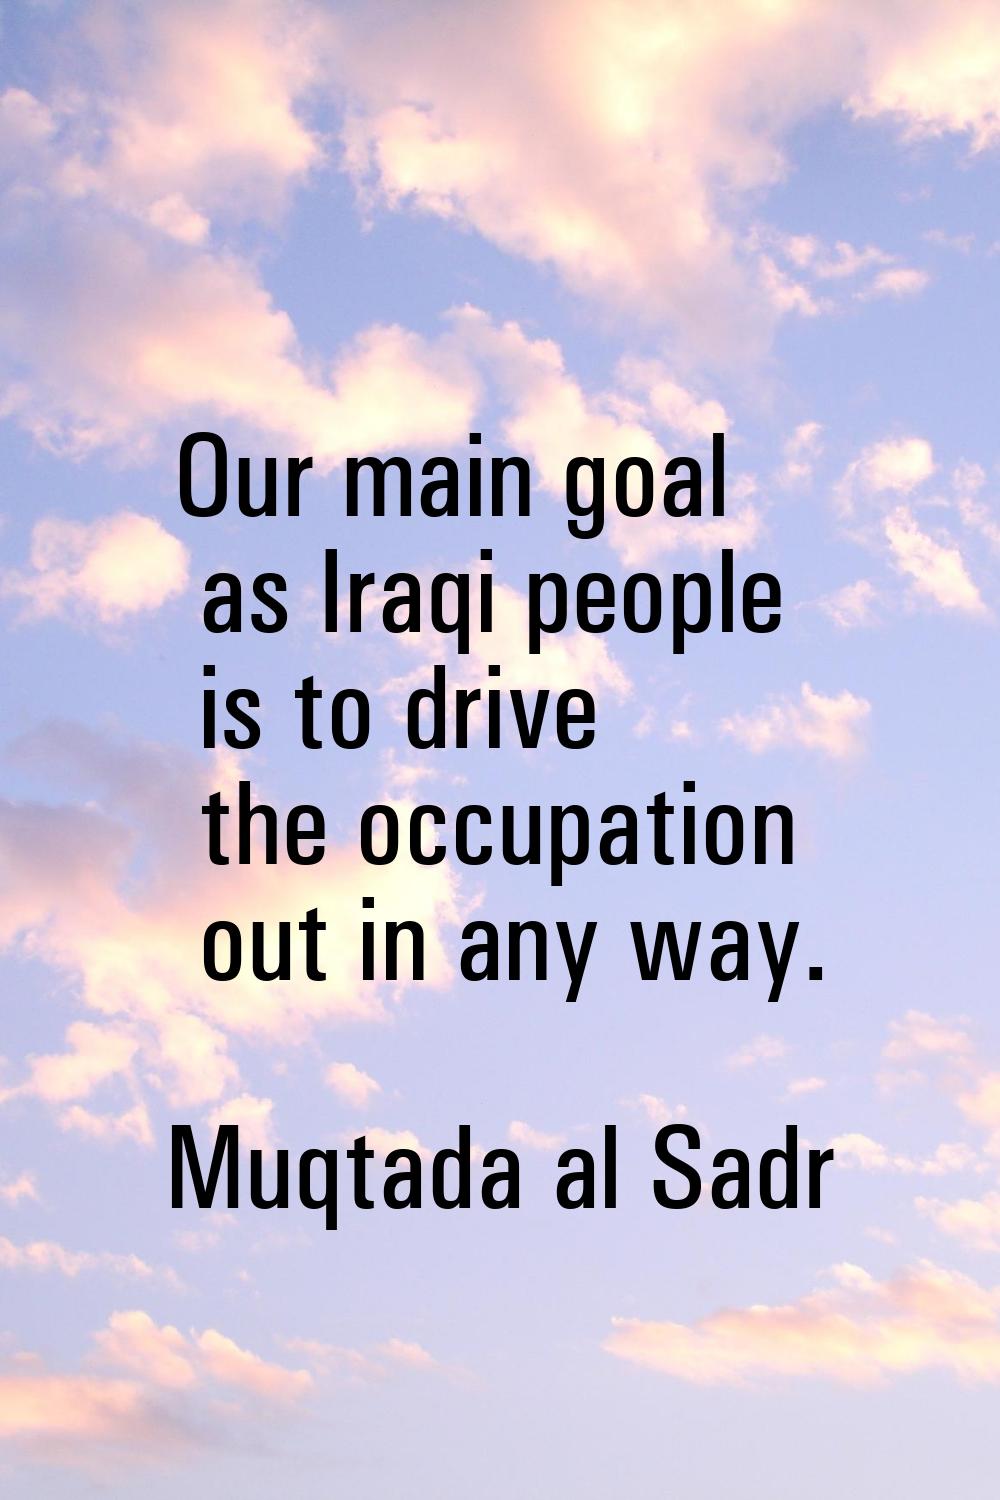 Our main goal as Iraqi people is to drive the occupation out in any way.